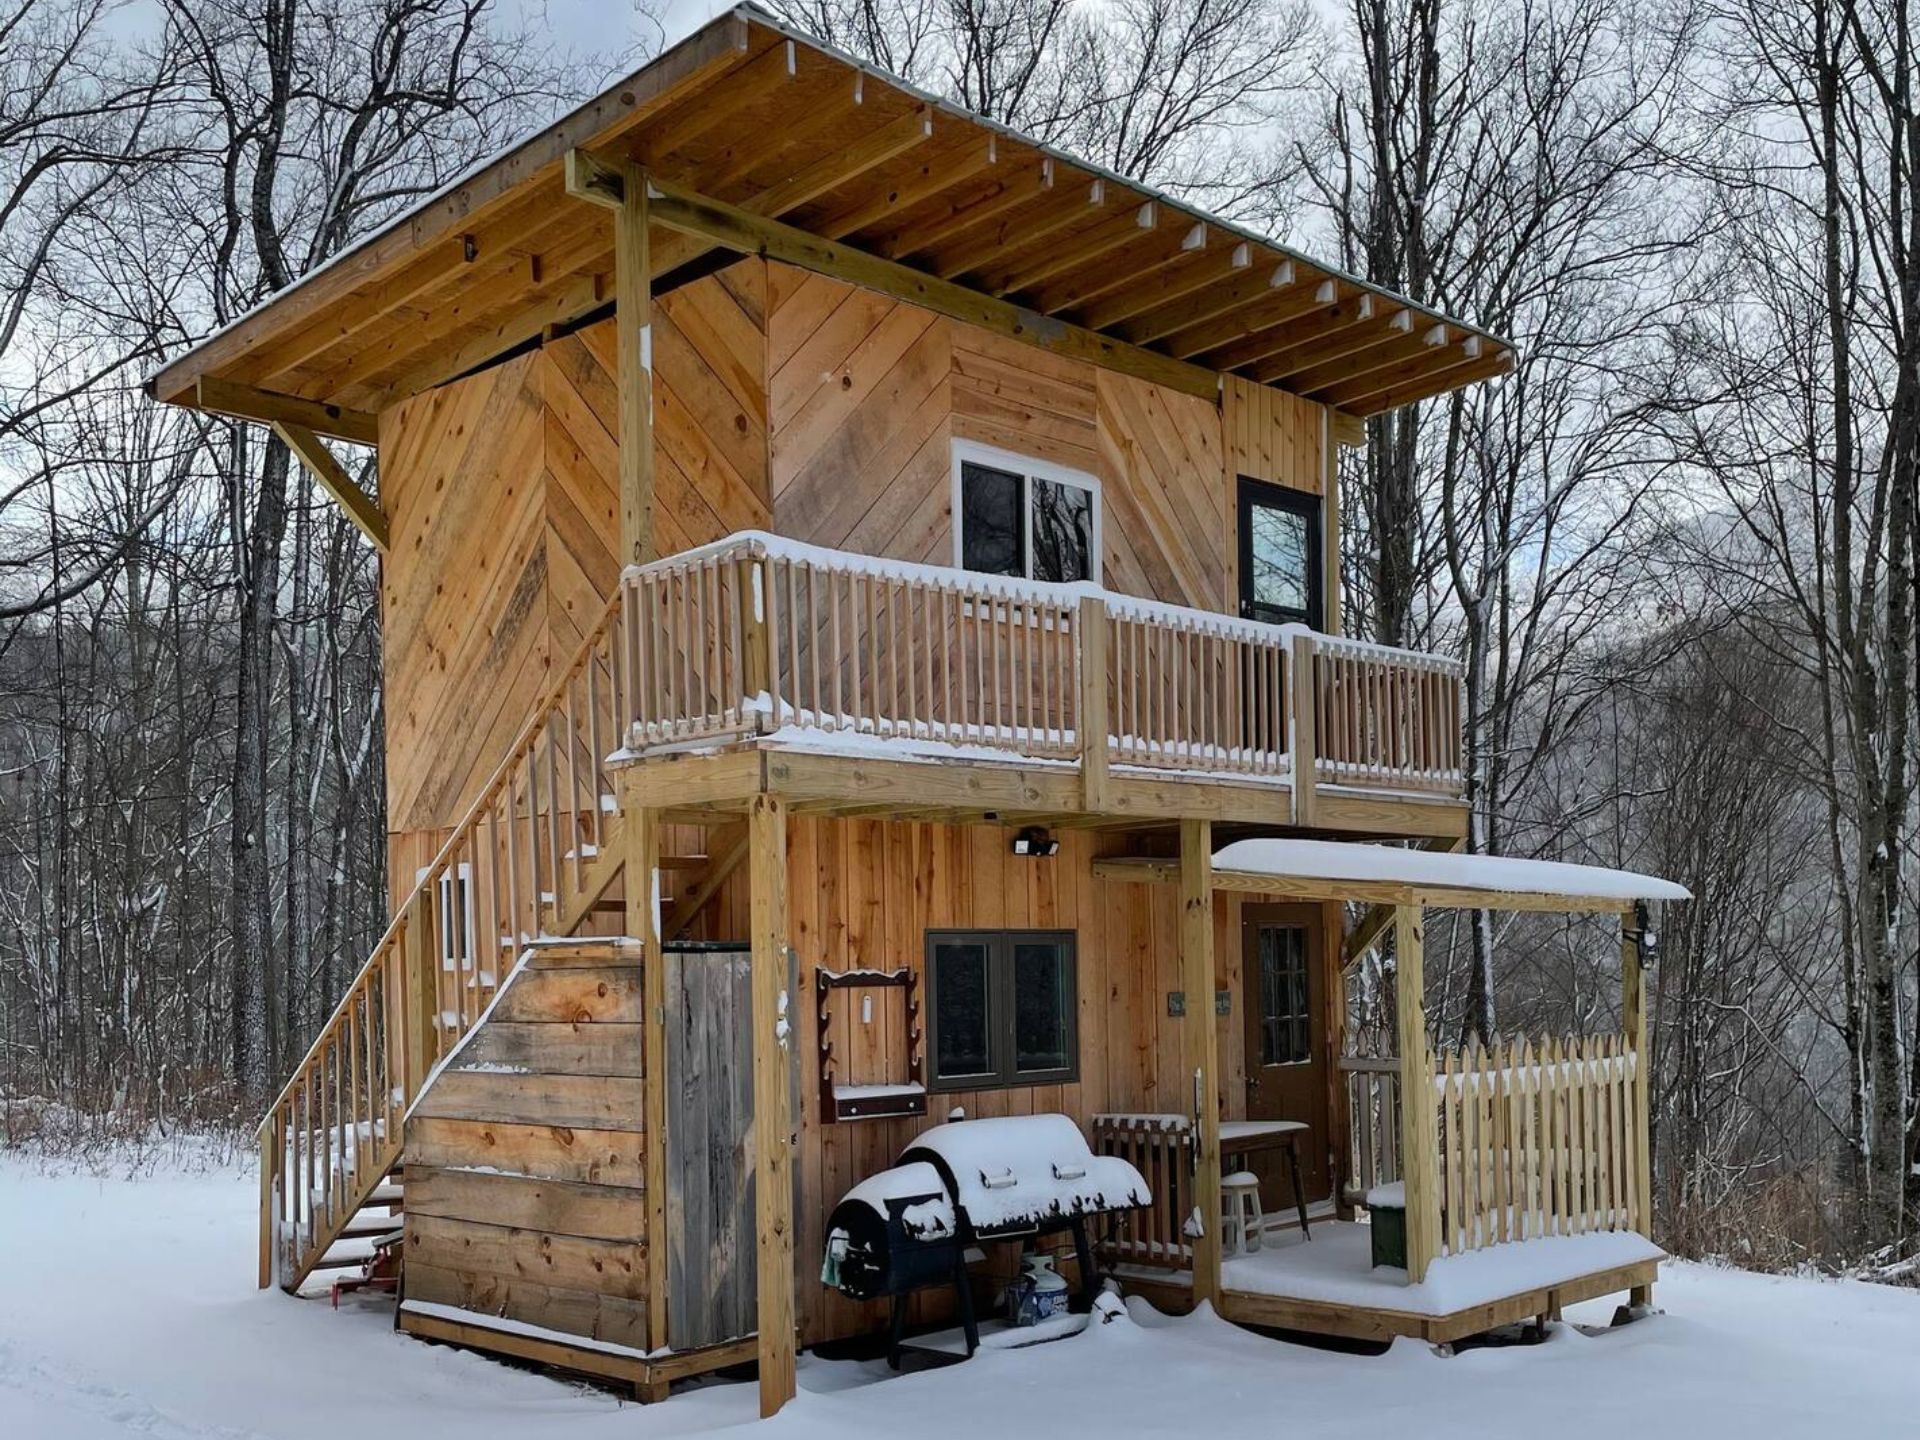 This Hideaway Cabin Will Make The Chaos Of The World Disappear